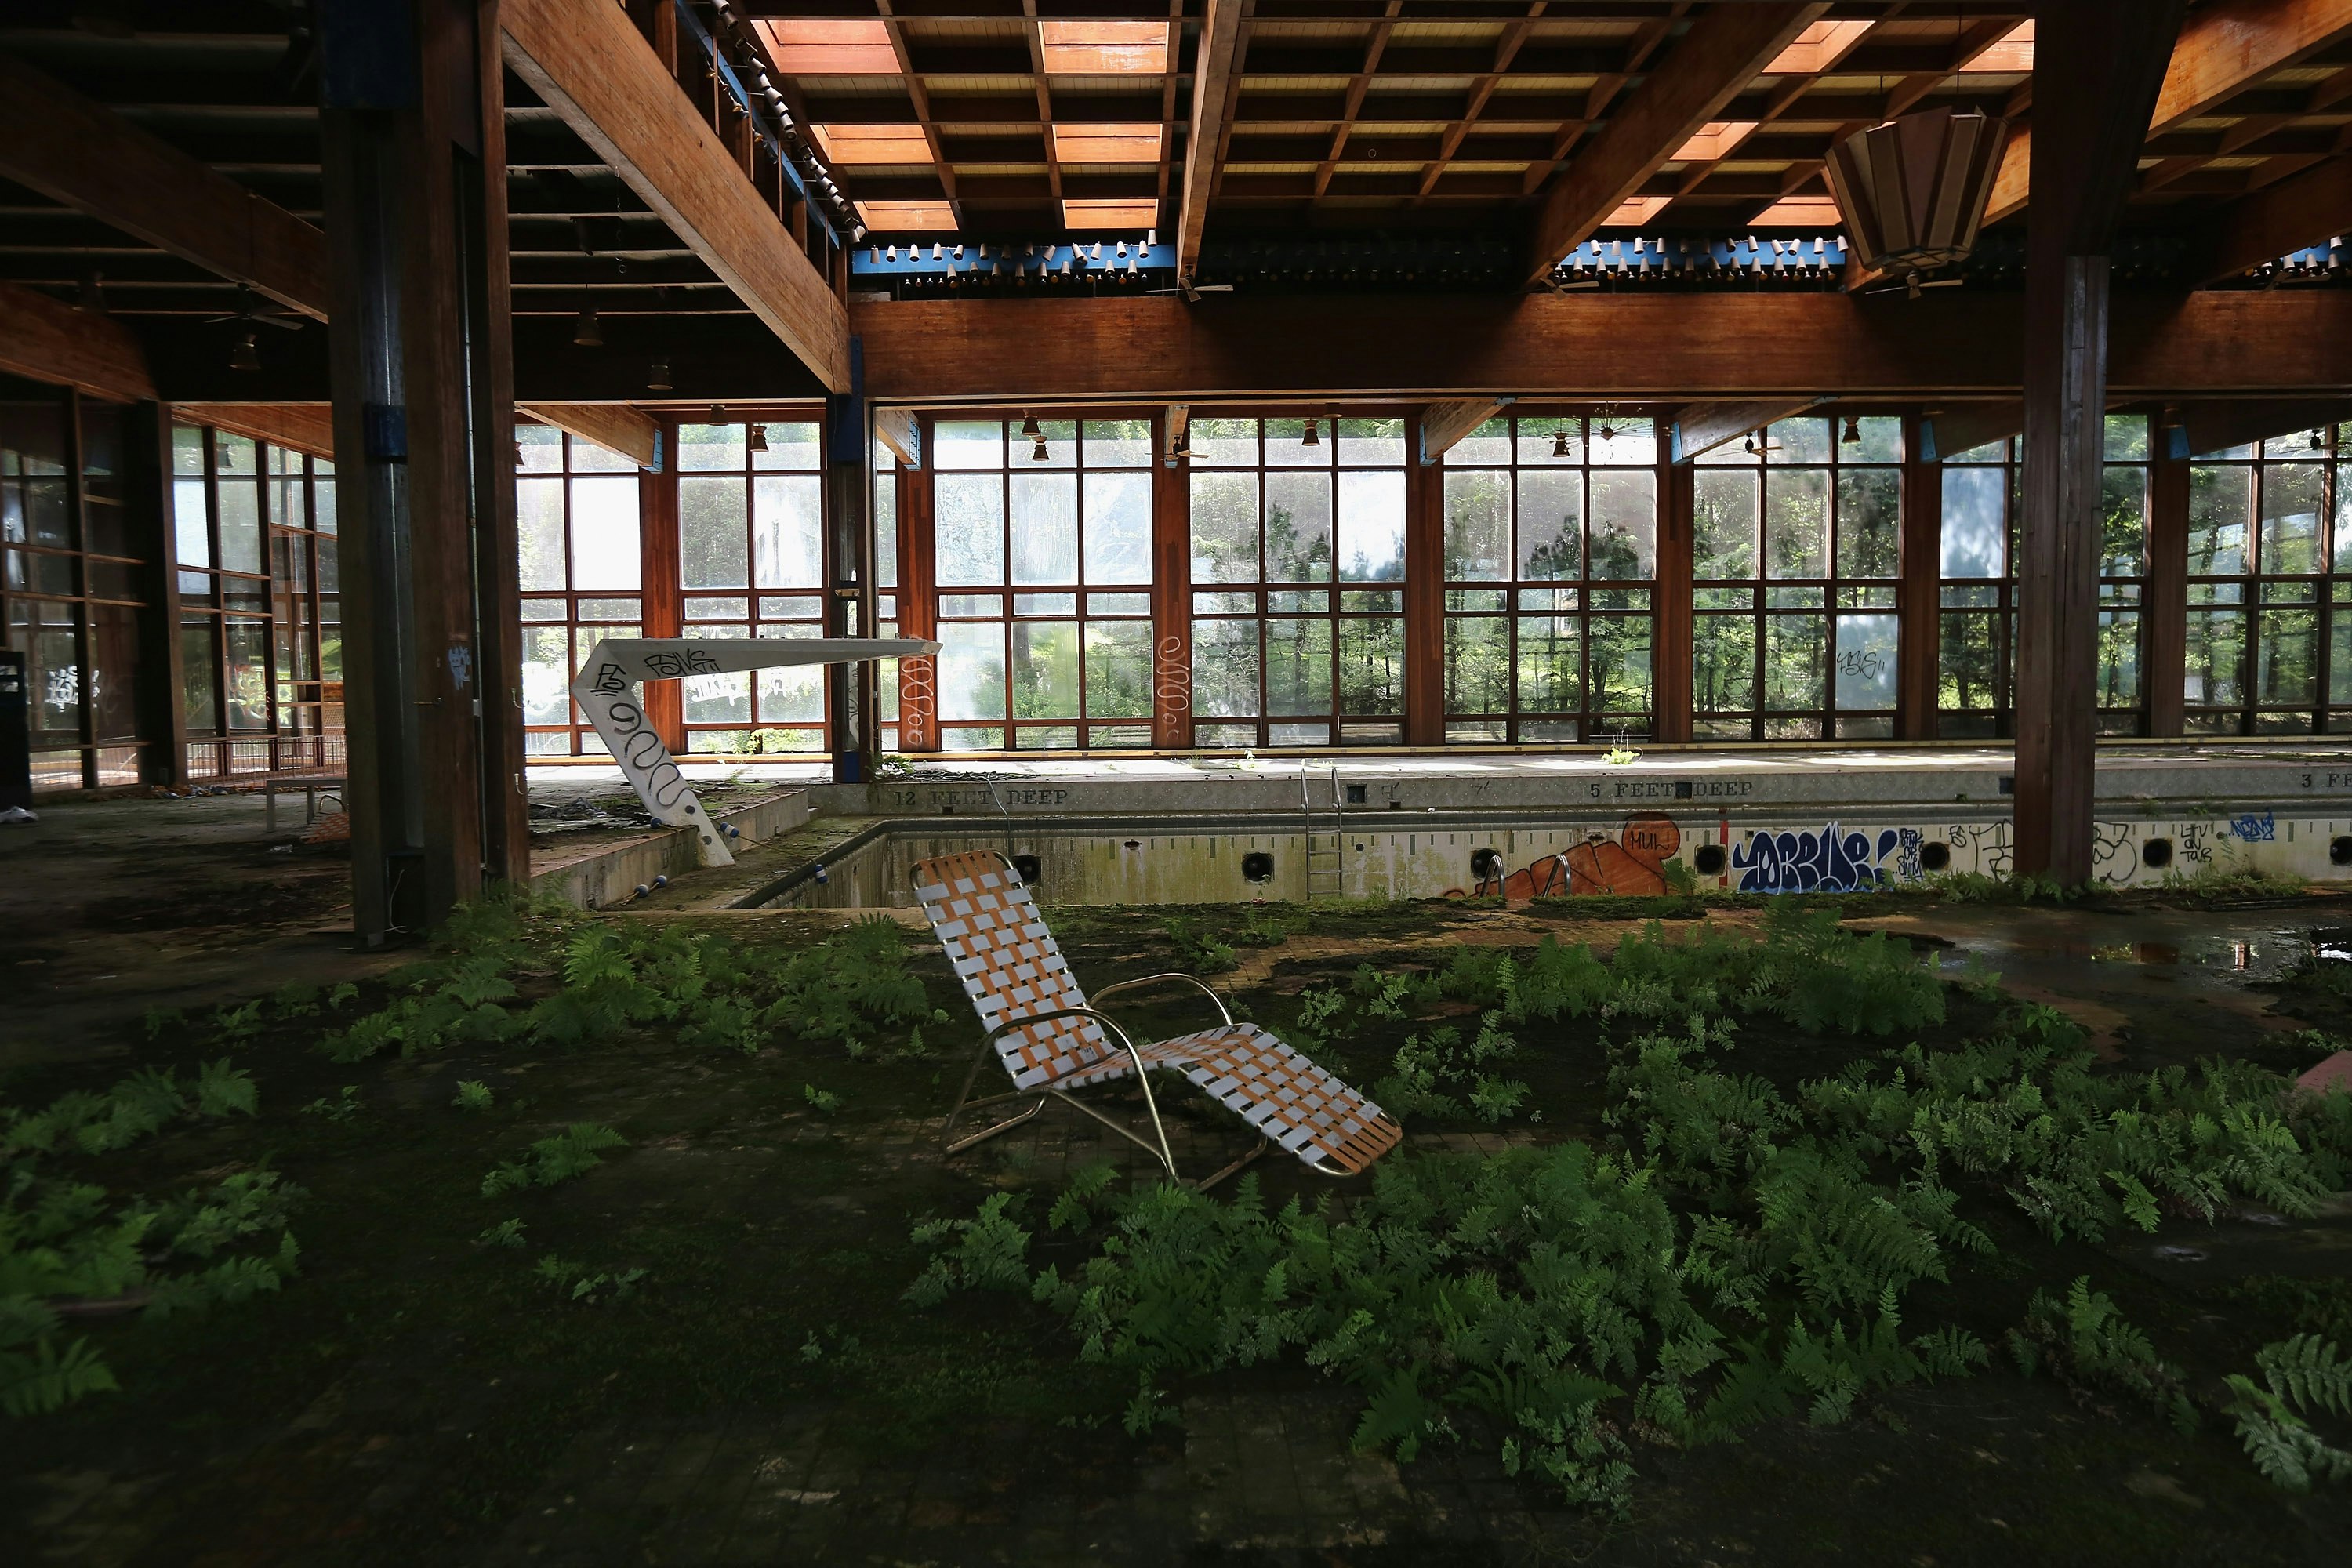 The once-luxe pool at Grossinger's resort is grown over, with ferns and ivy covering what was once the pool deck and graffiti dotting the drained concrete interior of the pool. A lone orange and white deck chair sits in the center of the frame hi-lighting the decrepitude.